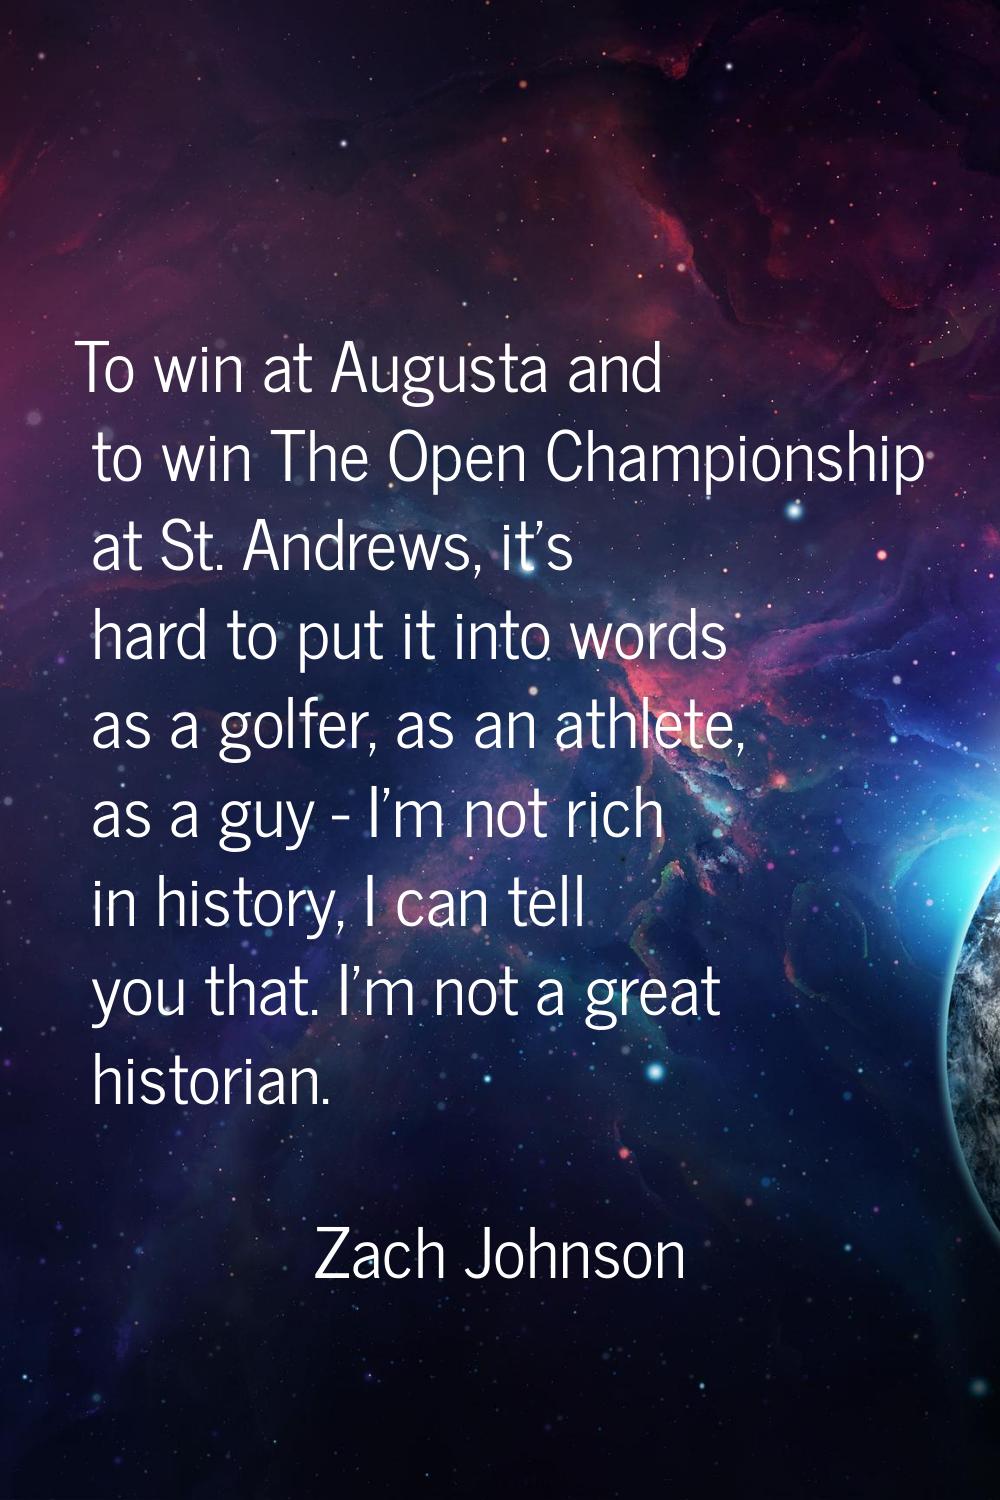 To win at Augusta and to win The Open Championship at St. Andrews, it's hard to put it into words a